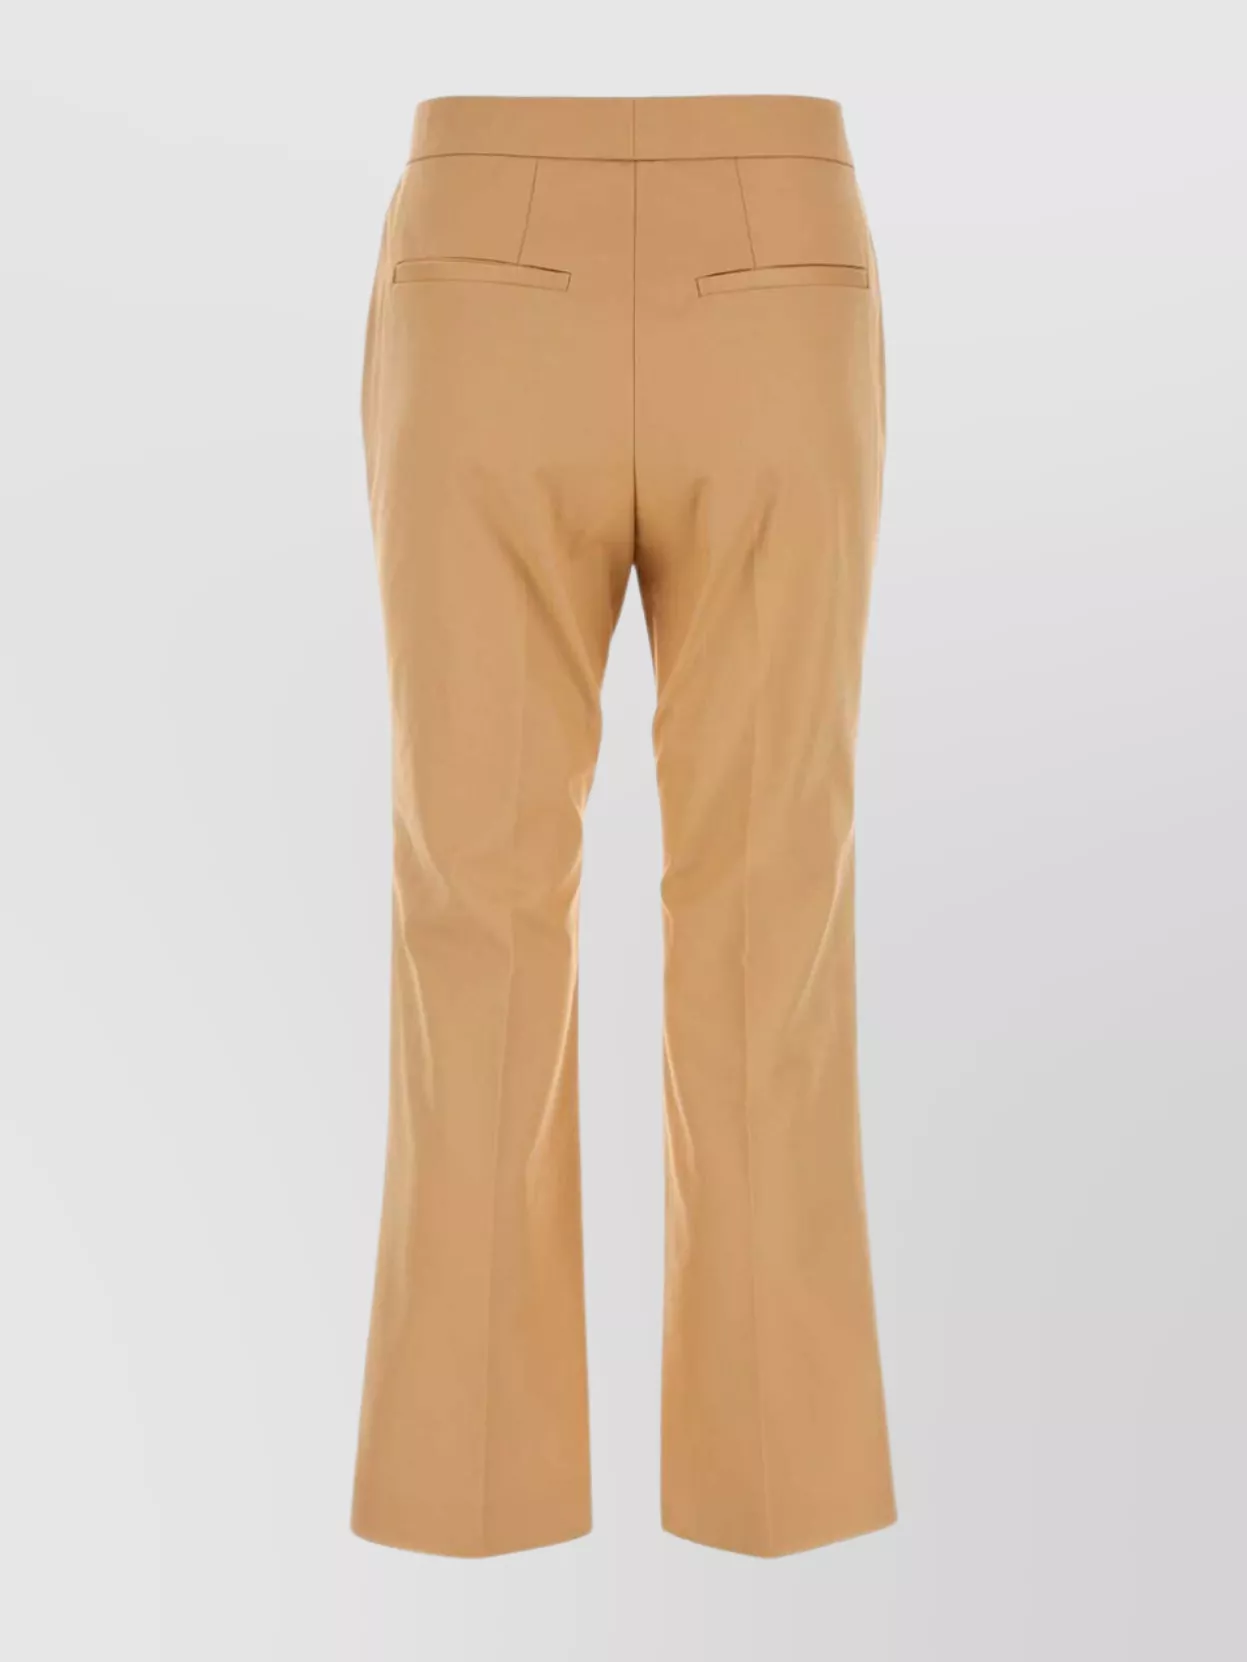 Jil Sander High Waist Flared Silhouette Trousers With Belt Loops In Brown